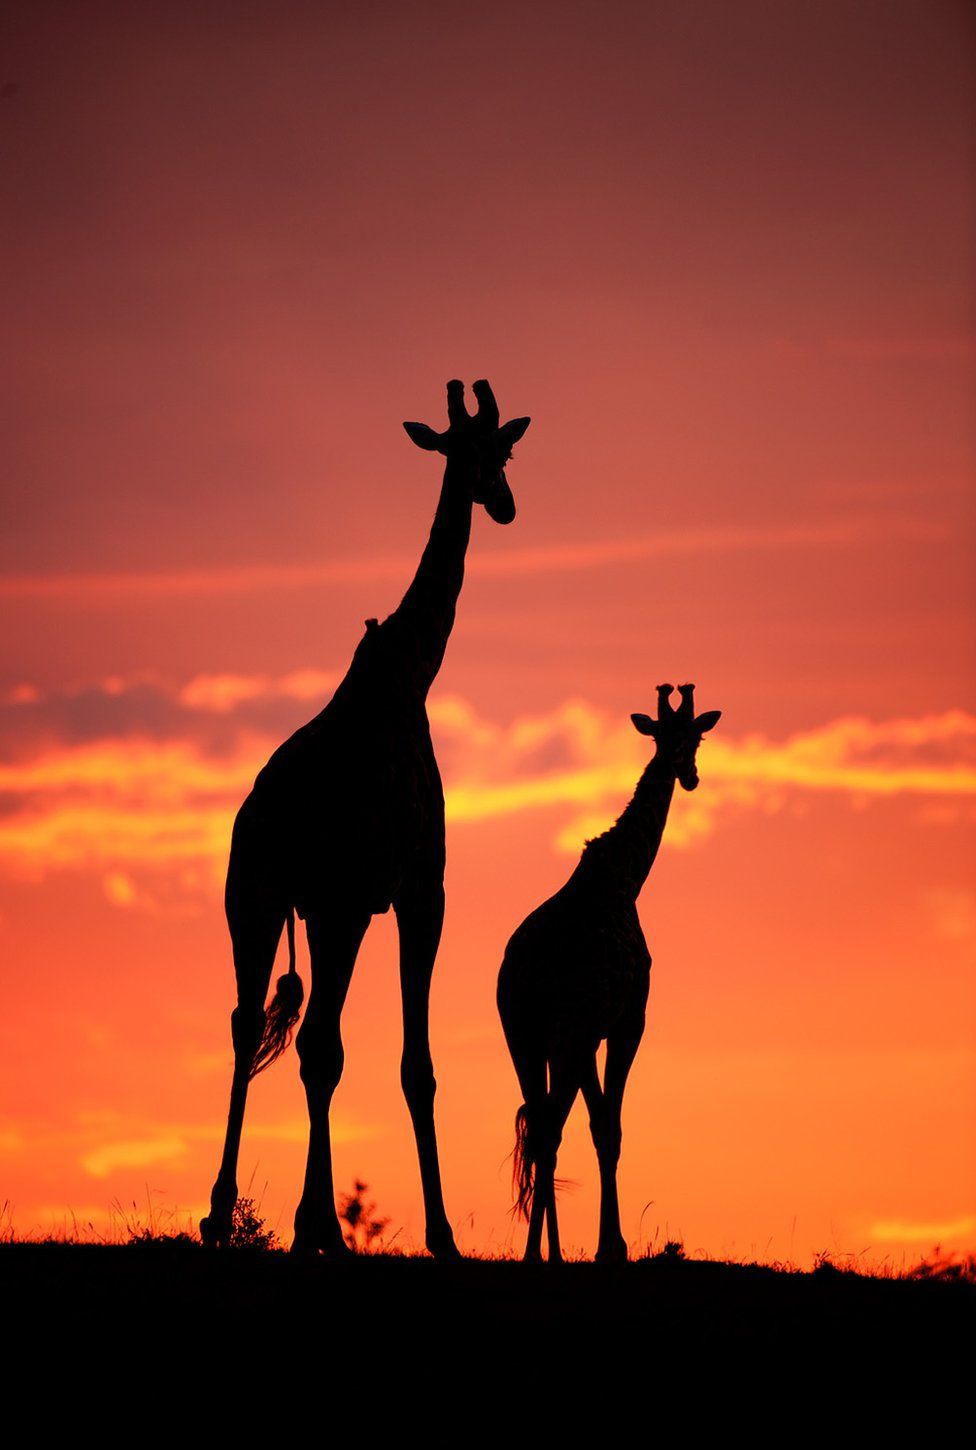 _103300600_mdrum_silhouettes_of_africa-1